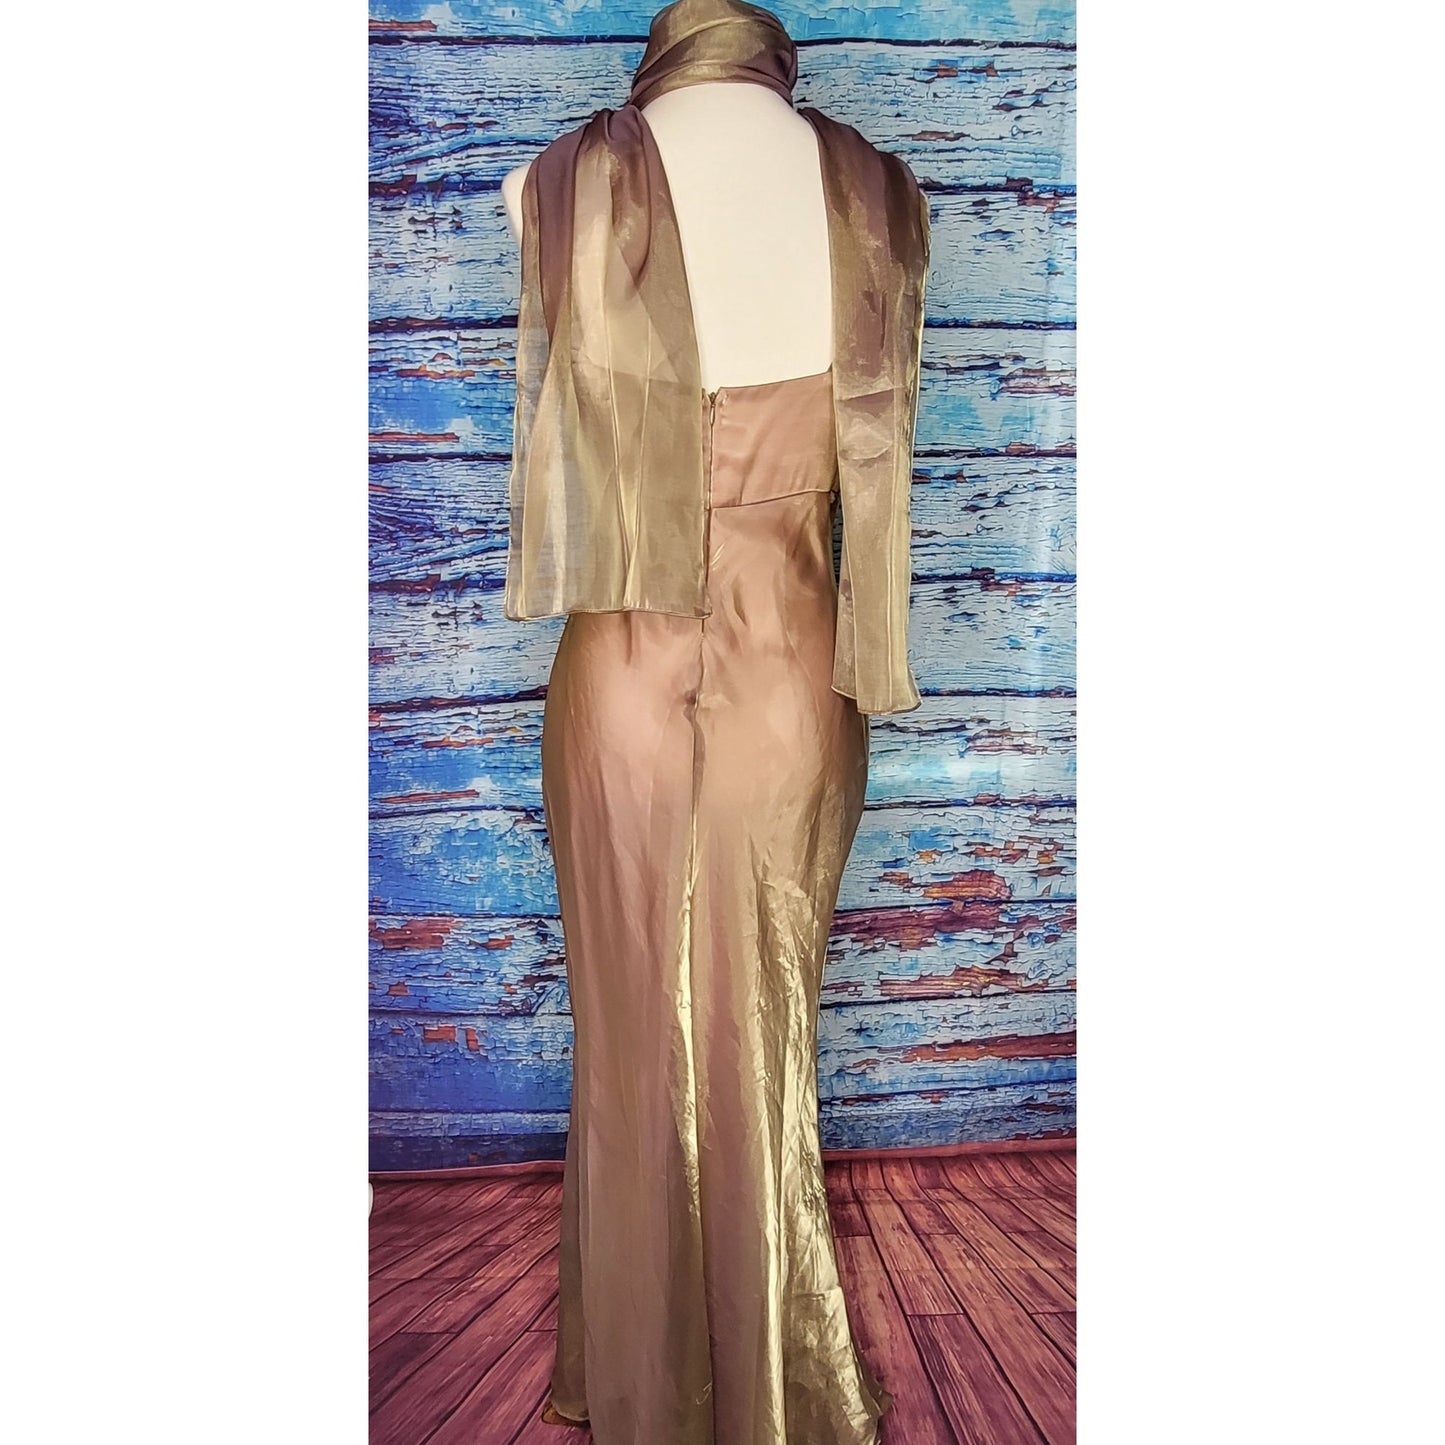 Shimmery Gold Coty Prom/Bridesmaid Dress Stunning!